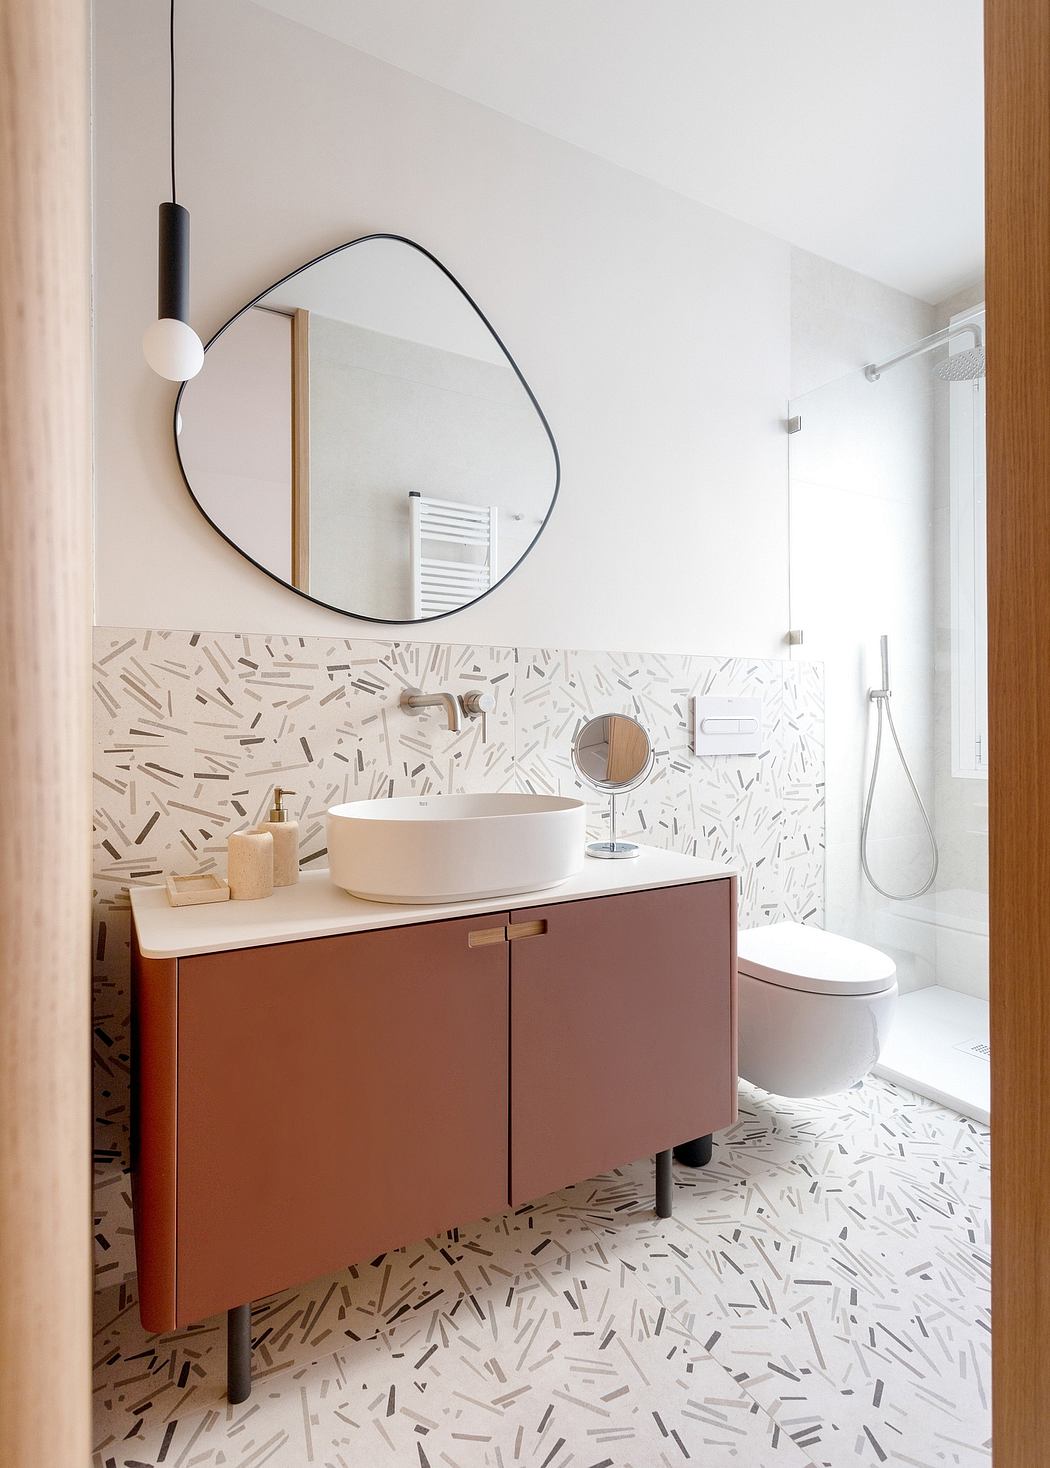 Minimalist bathroom design with a round mirror, vessel sink, and patterned tile floor.